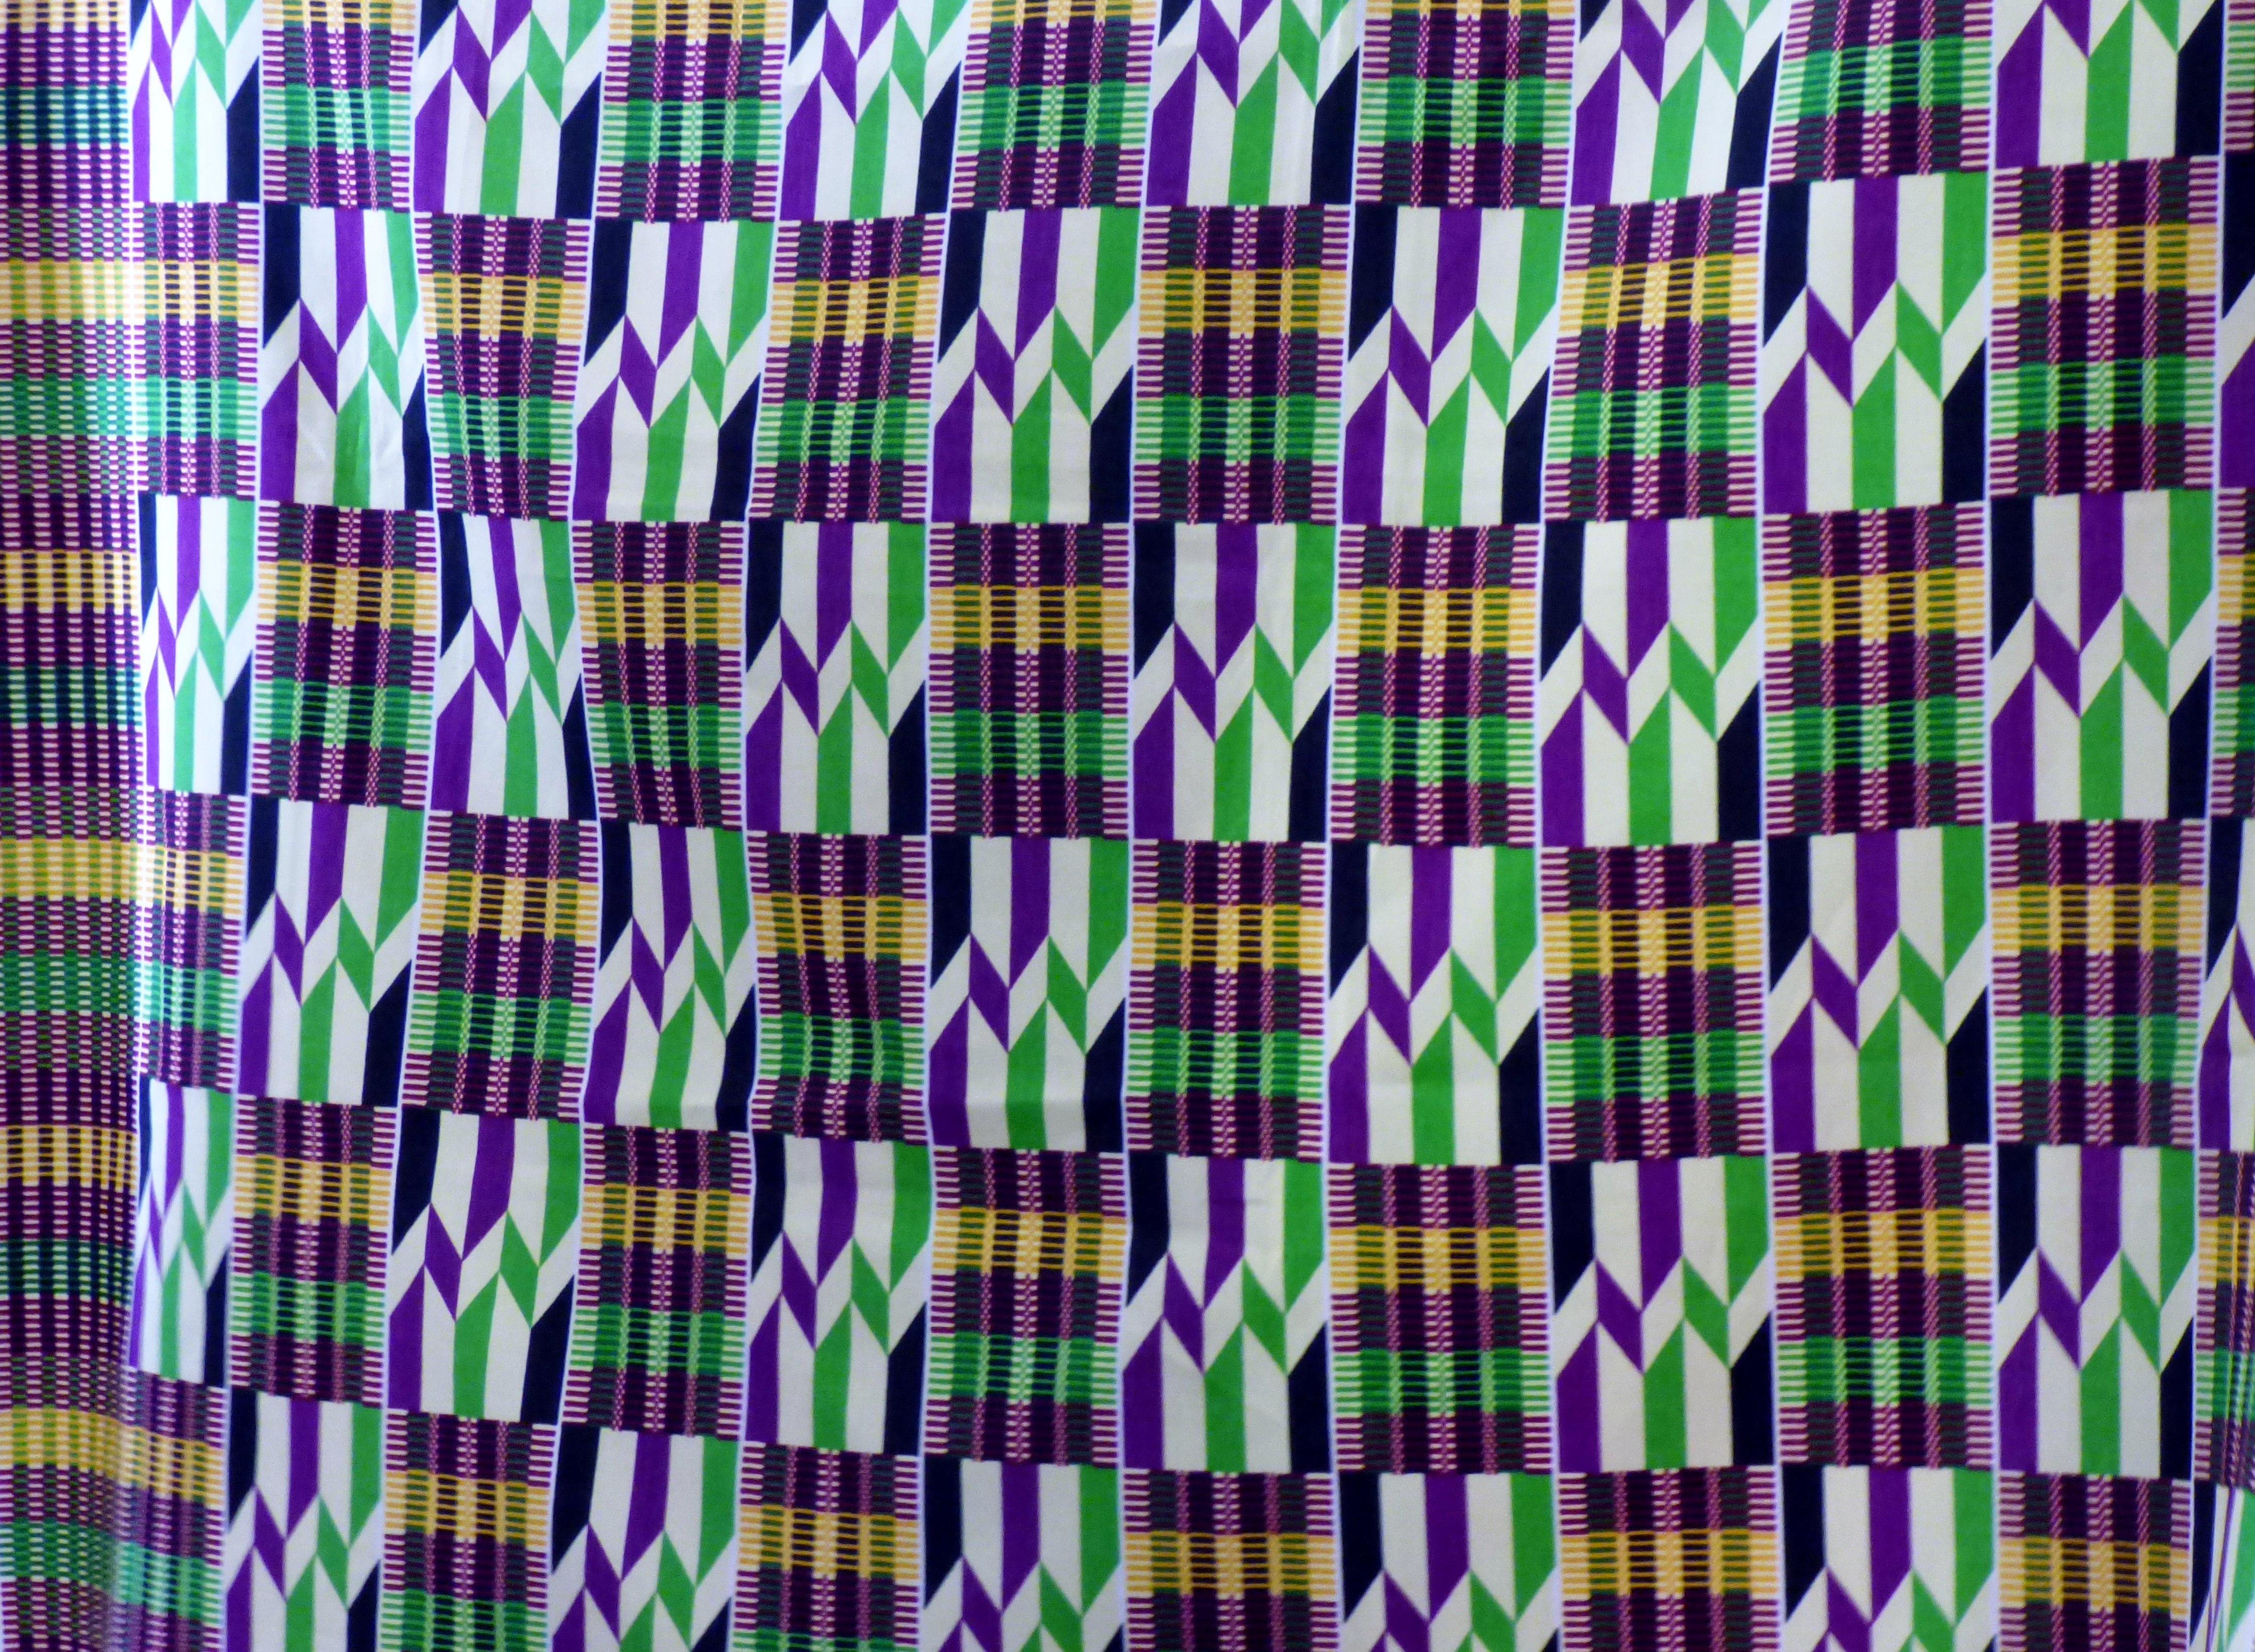 West African strip cloth shown by Magi Relph